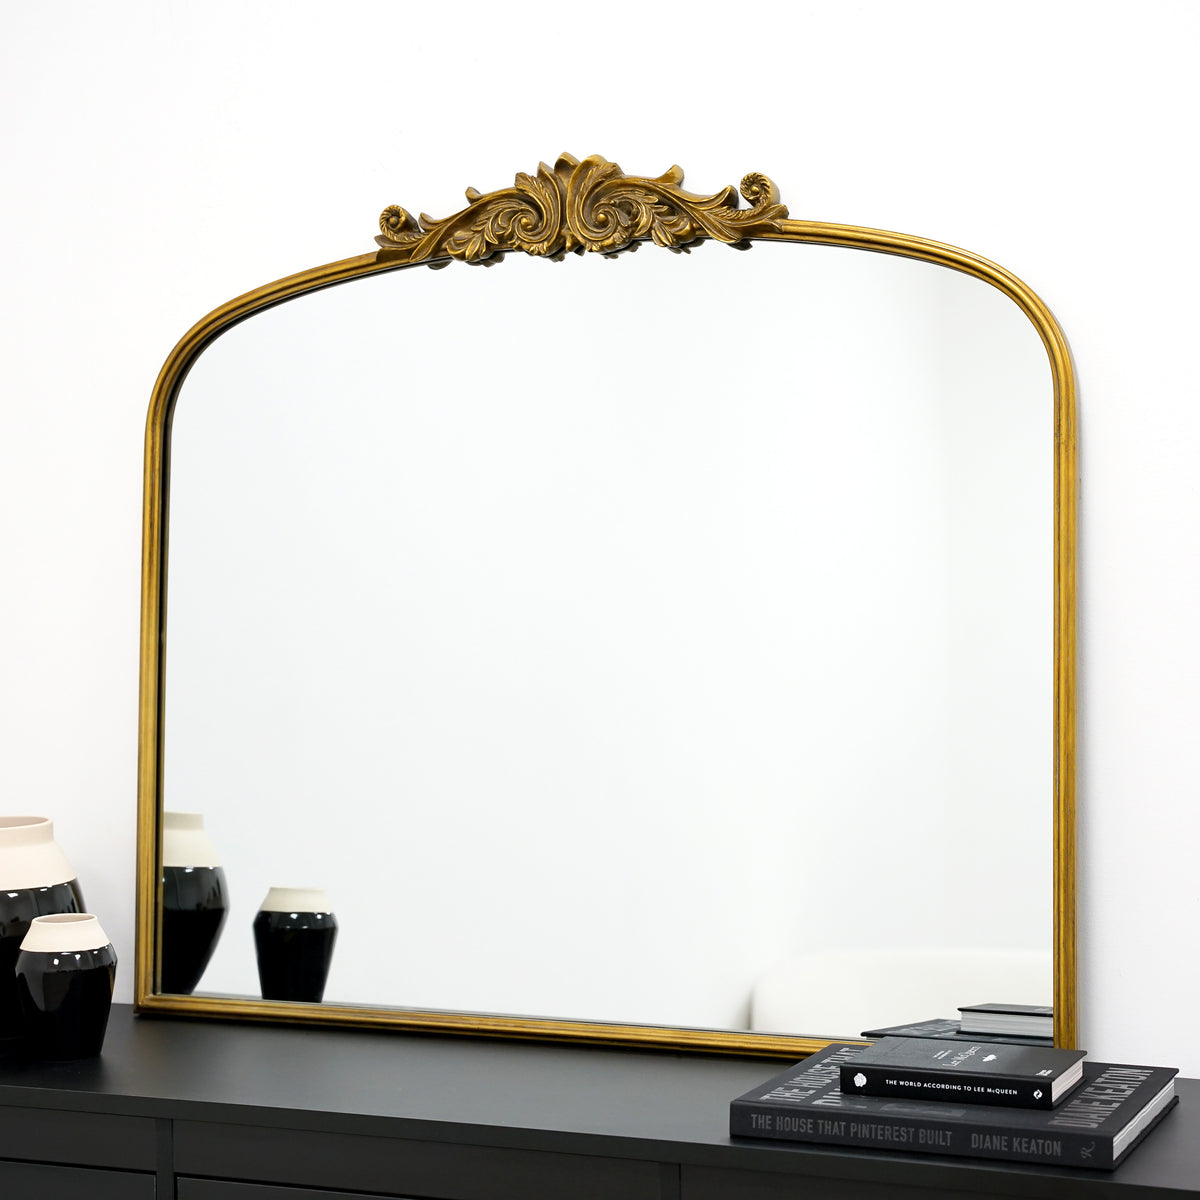 Gold arched ornate metal overmantle mirror on console table